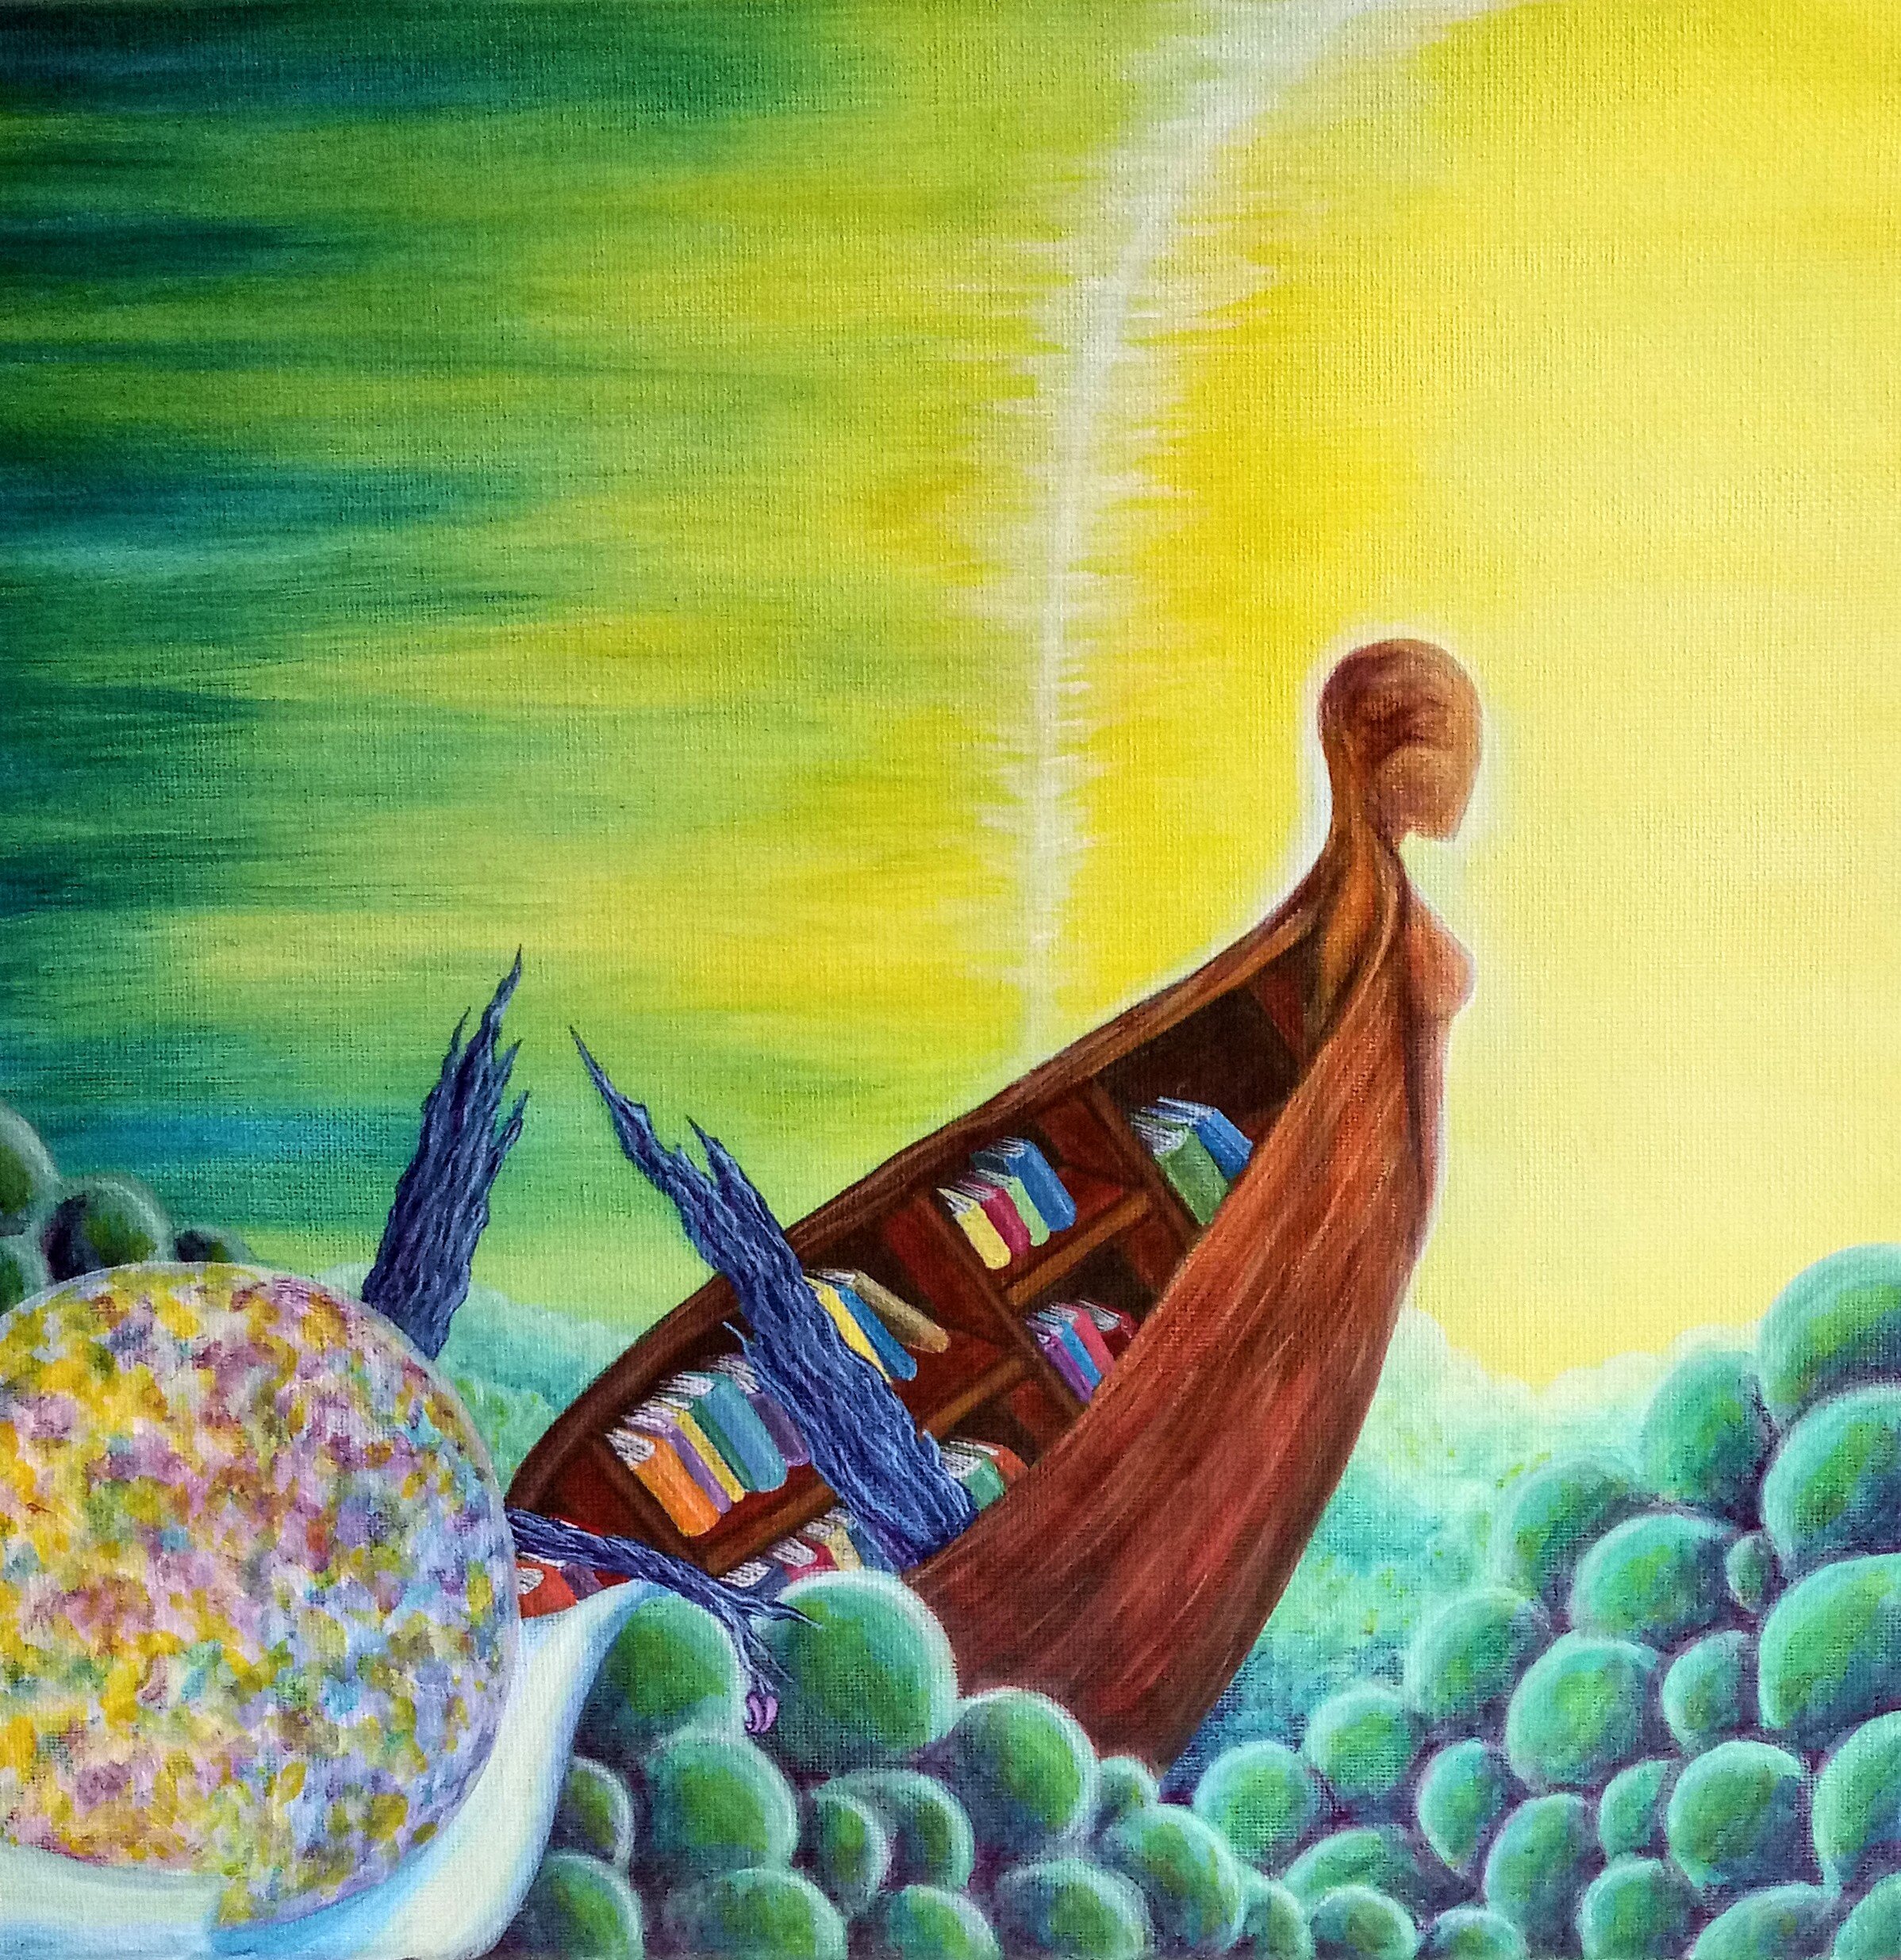 Dreamscape original acrylic and watercolor painting